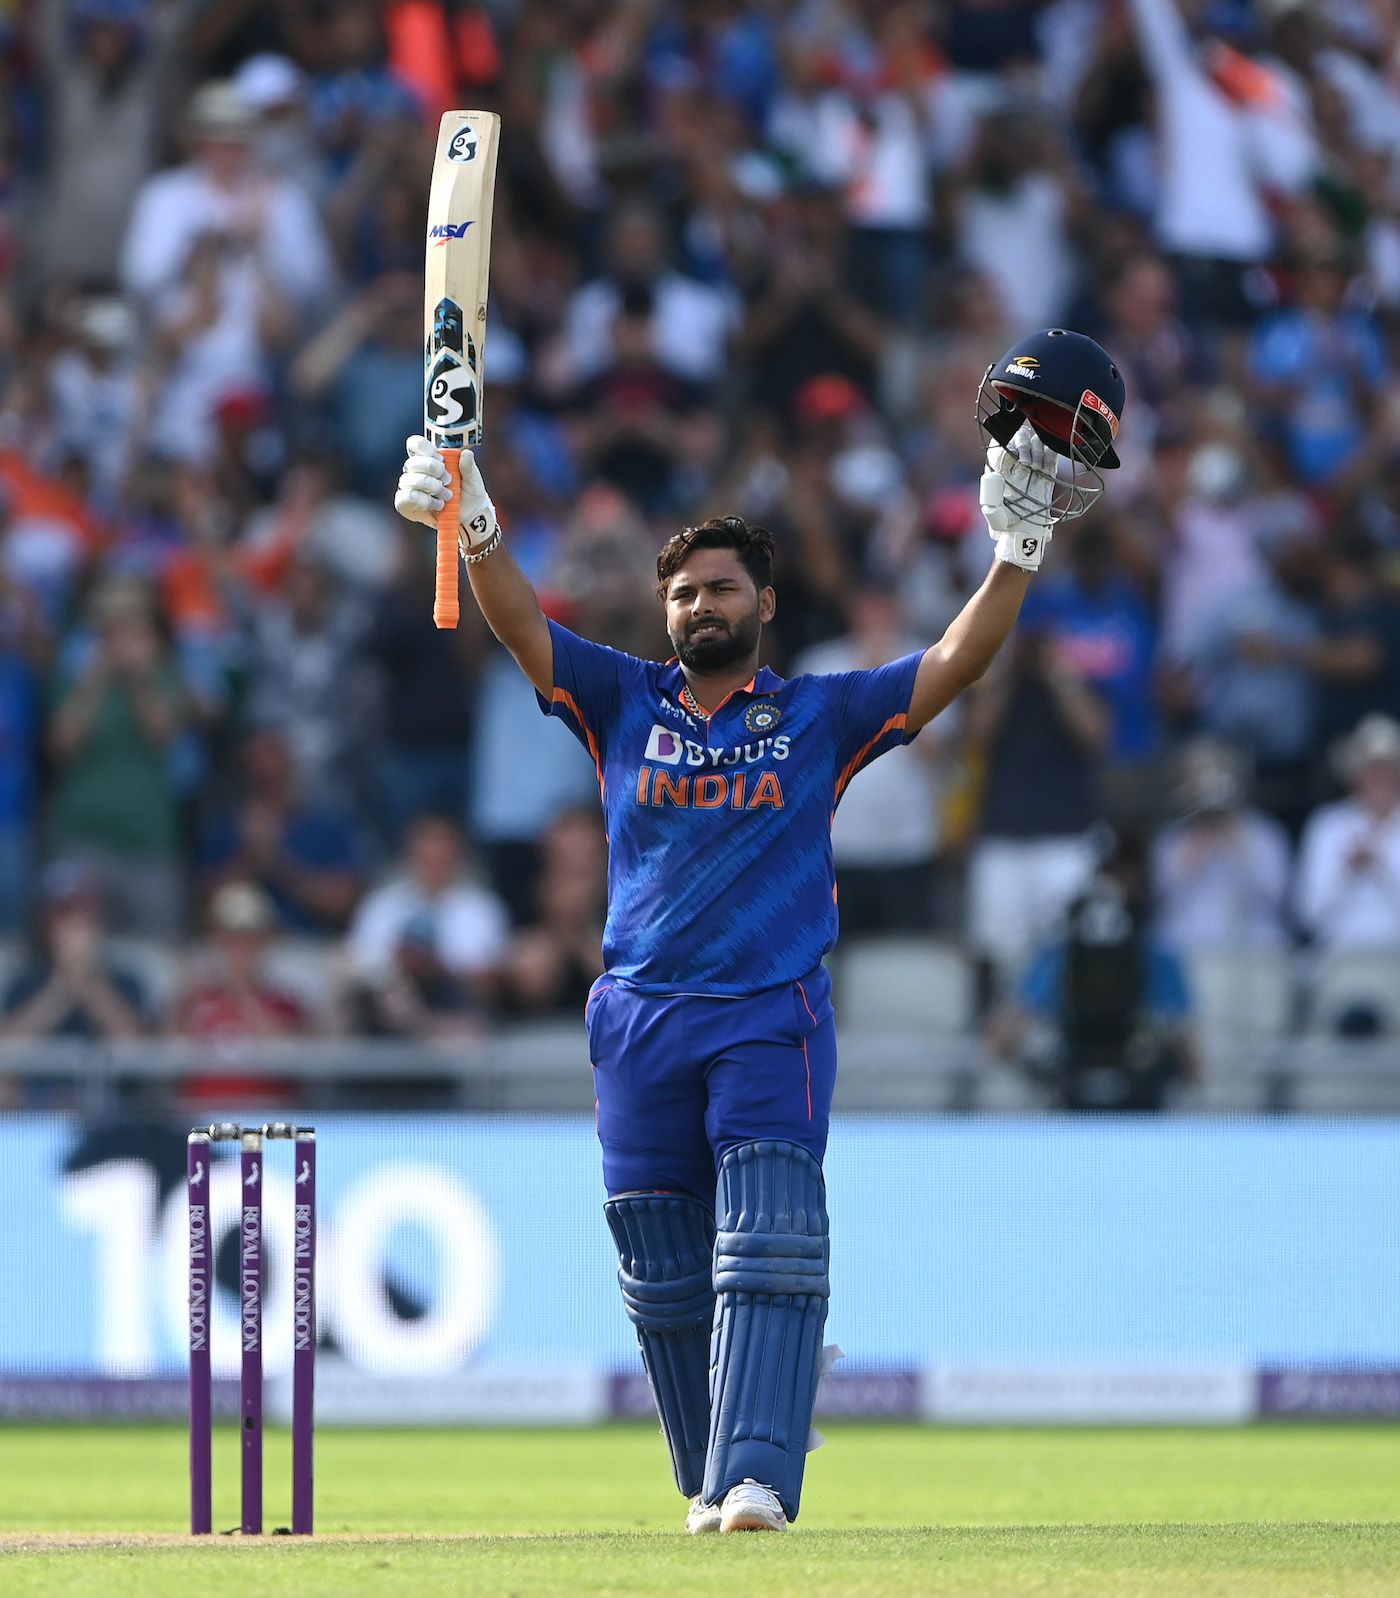 Rishabh Pant celebrates after getting to a century 